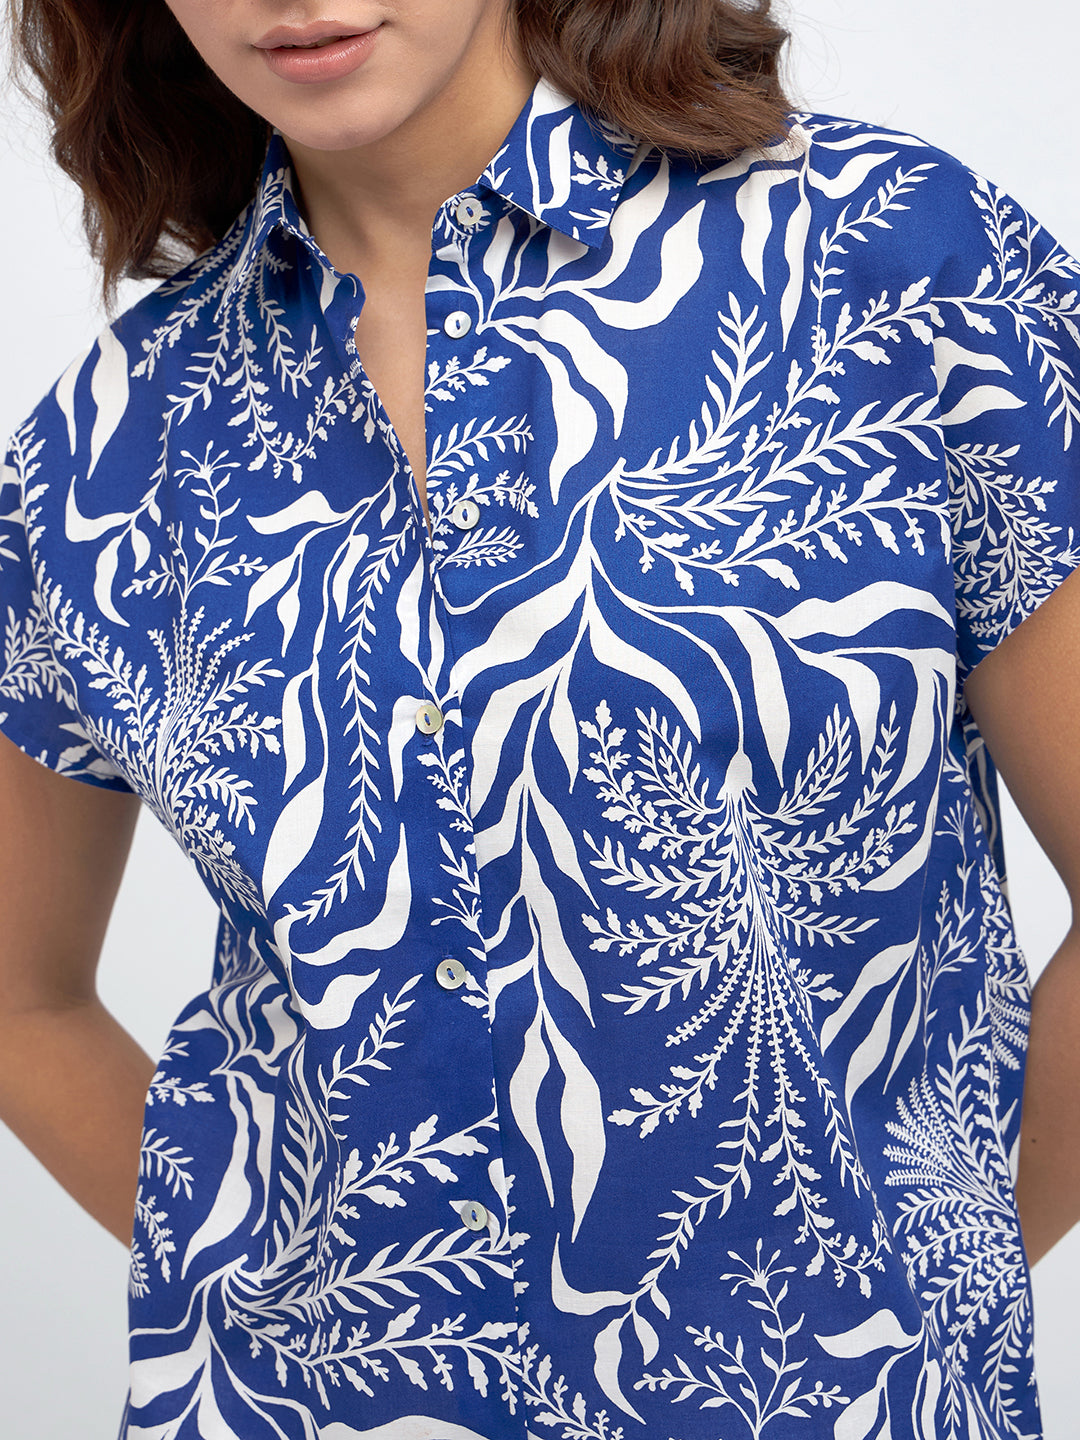 DL Woman Blue Boxy Floral Printed Cotton Casual Shirt